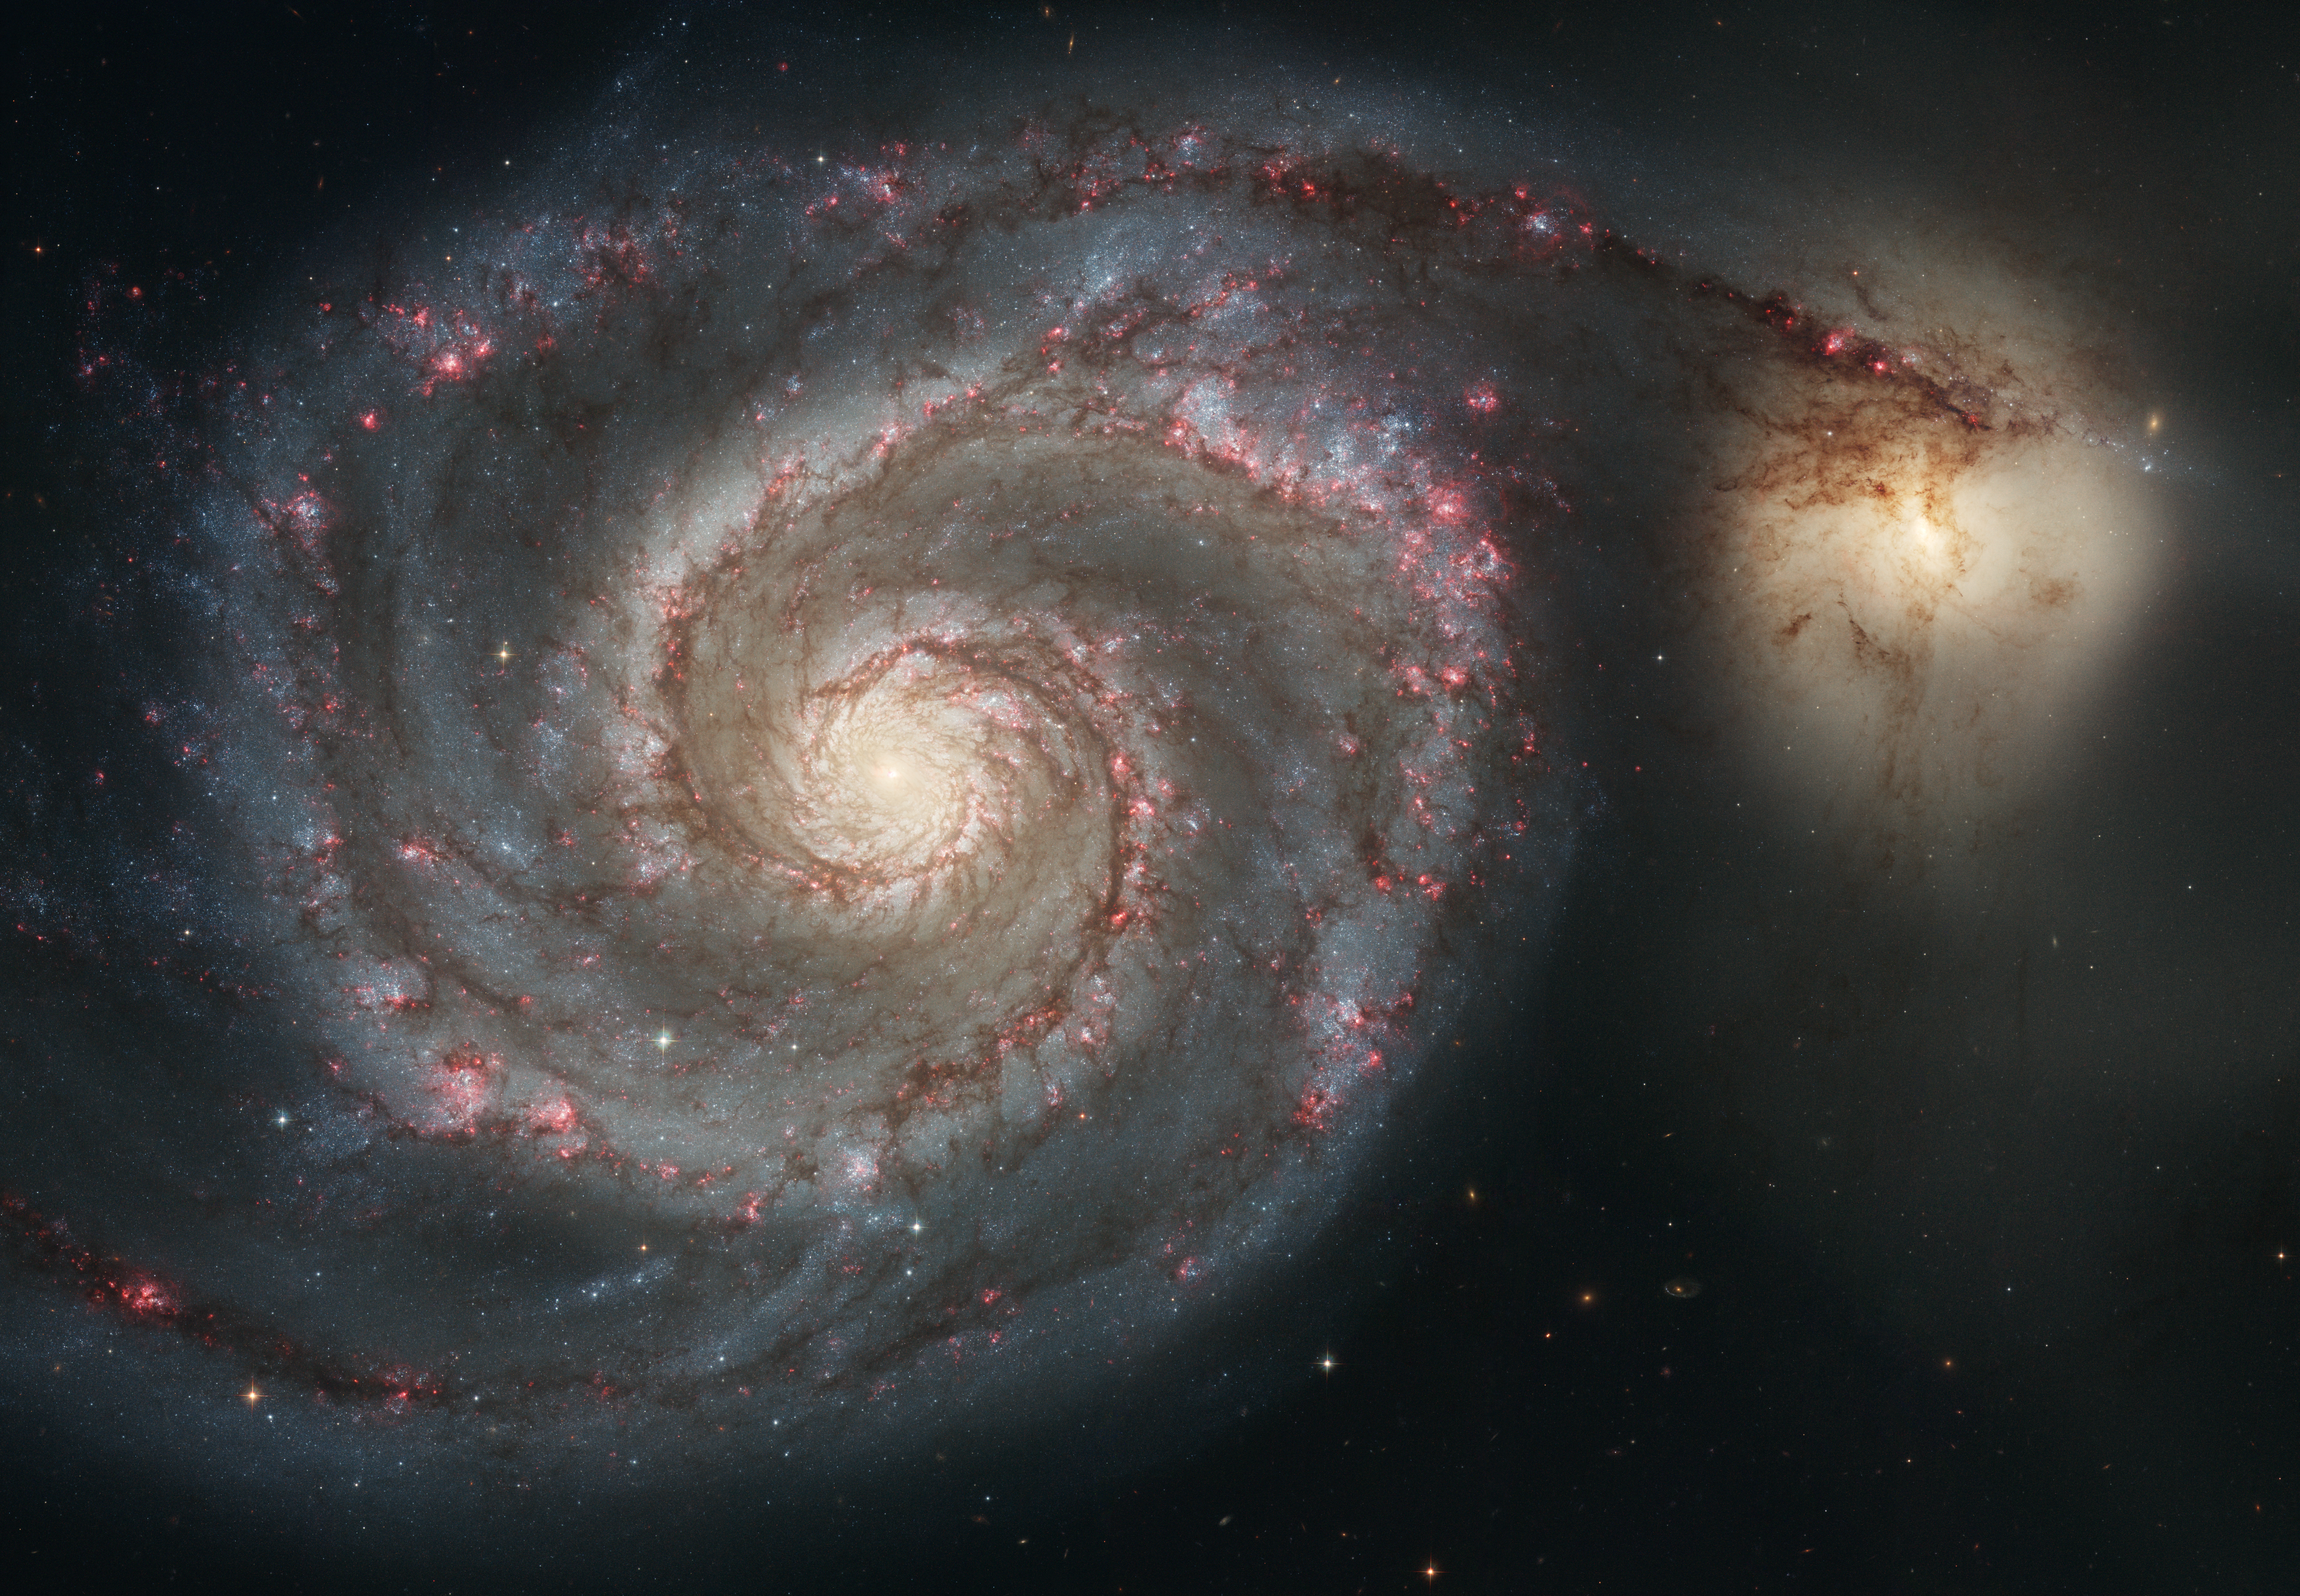 The Whirlpool Galaxy (Spiral Galaxy M51, NGC 5194) is a classic spiral galaxy located in the Canes Venatici constellation.